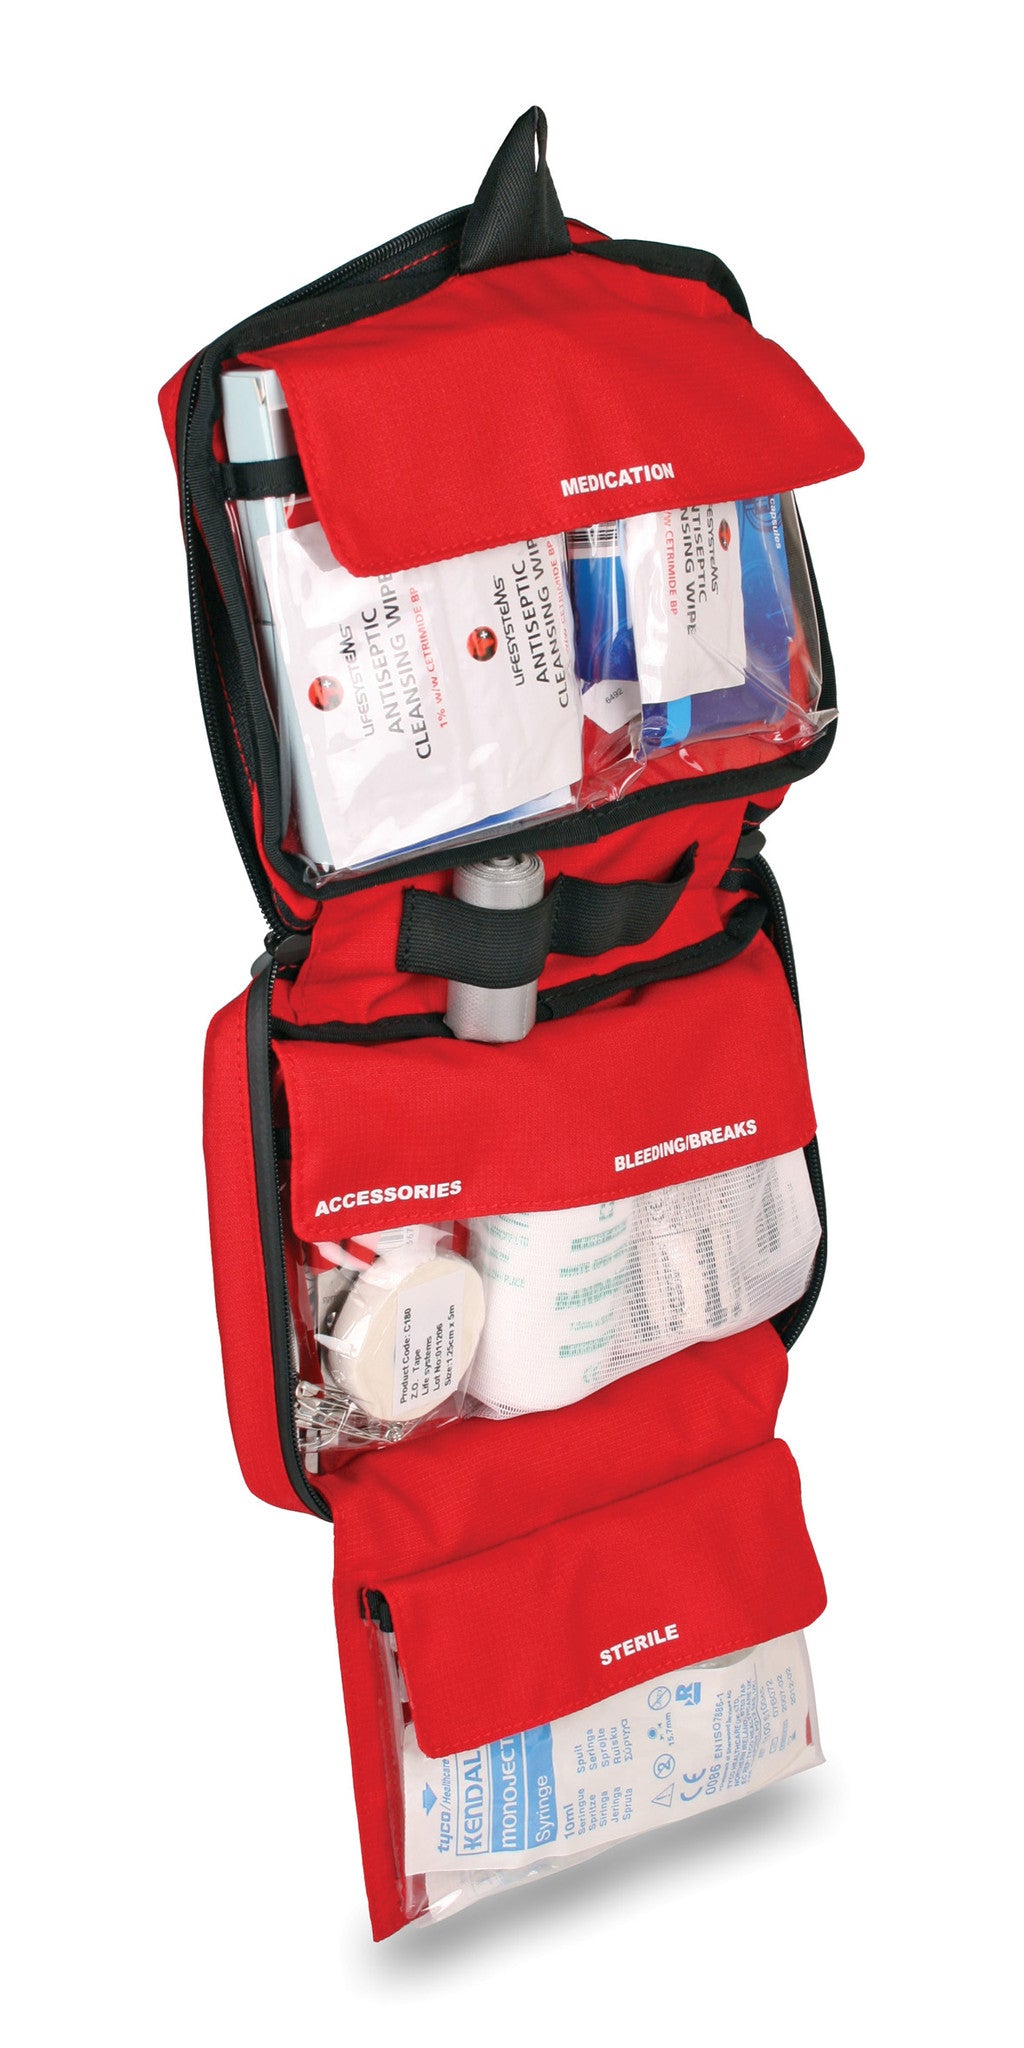 Lifesystems Solo Traveller First Aid Kit nz